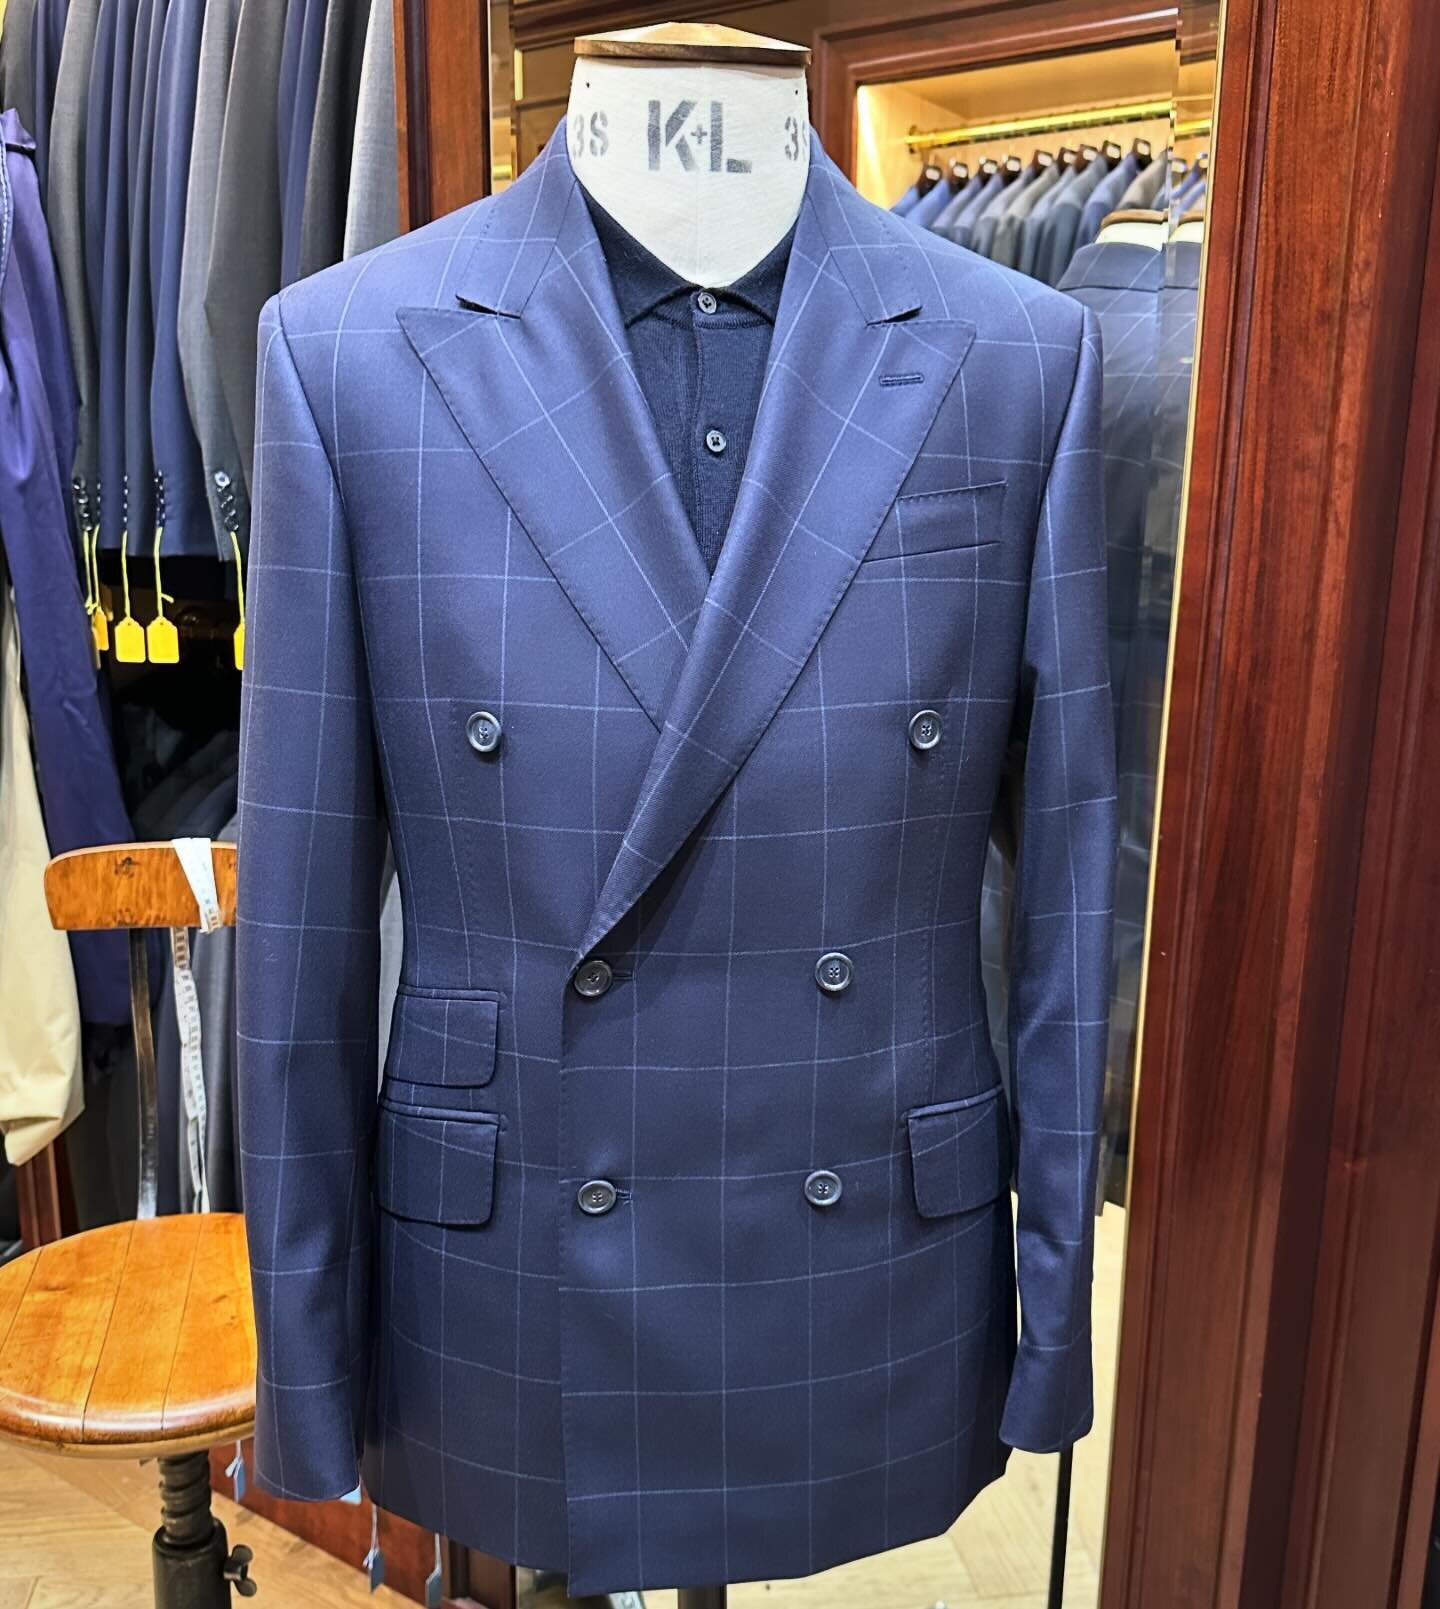 Our latest addition to the Ready to Wear range is this stunning Navy Blue Window Pane check in Double Breasted.

#doublebreastedsuit #readytowear #newsuit #drapersitaly